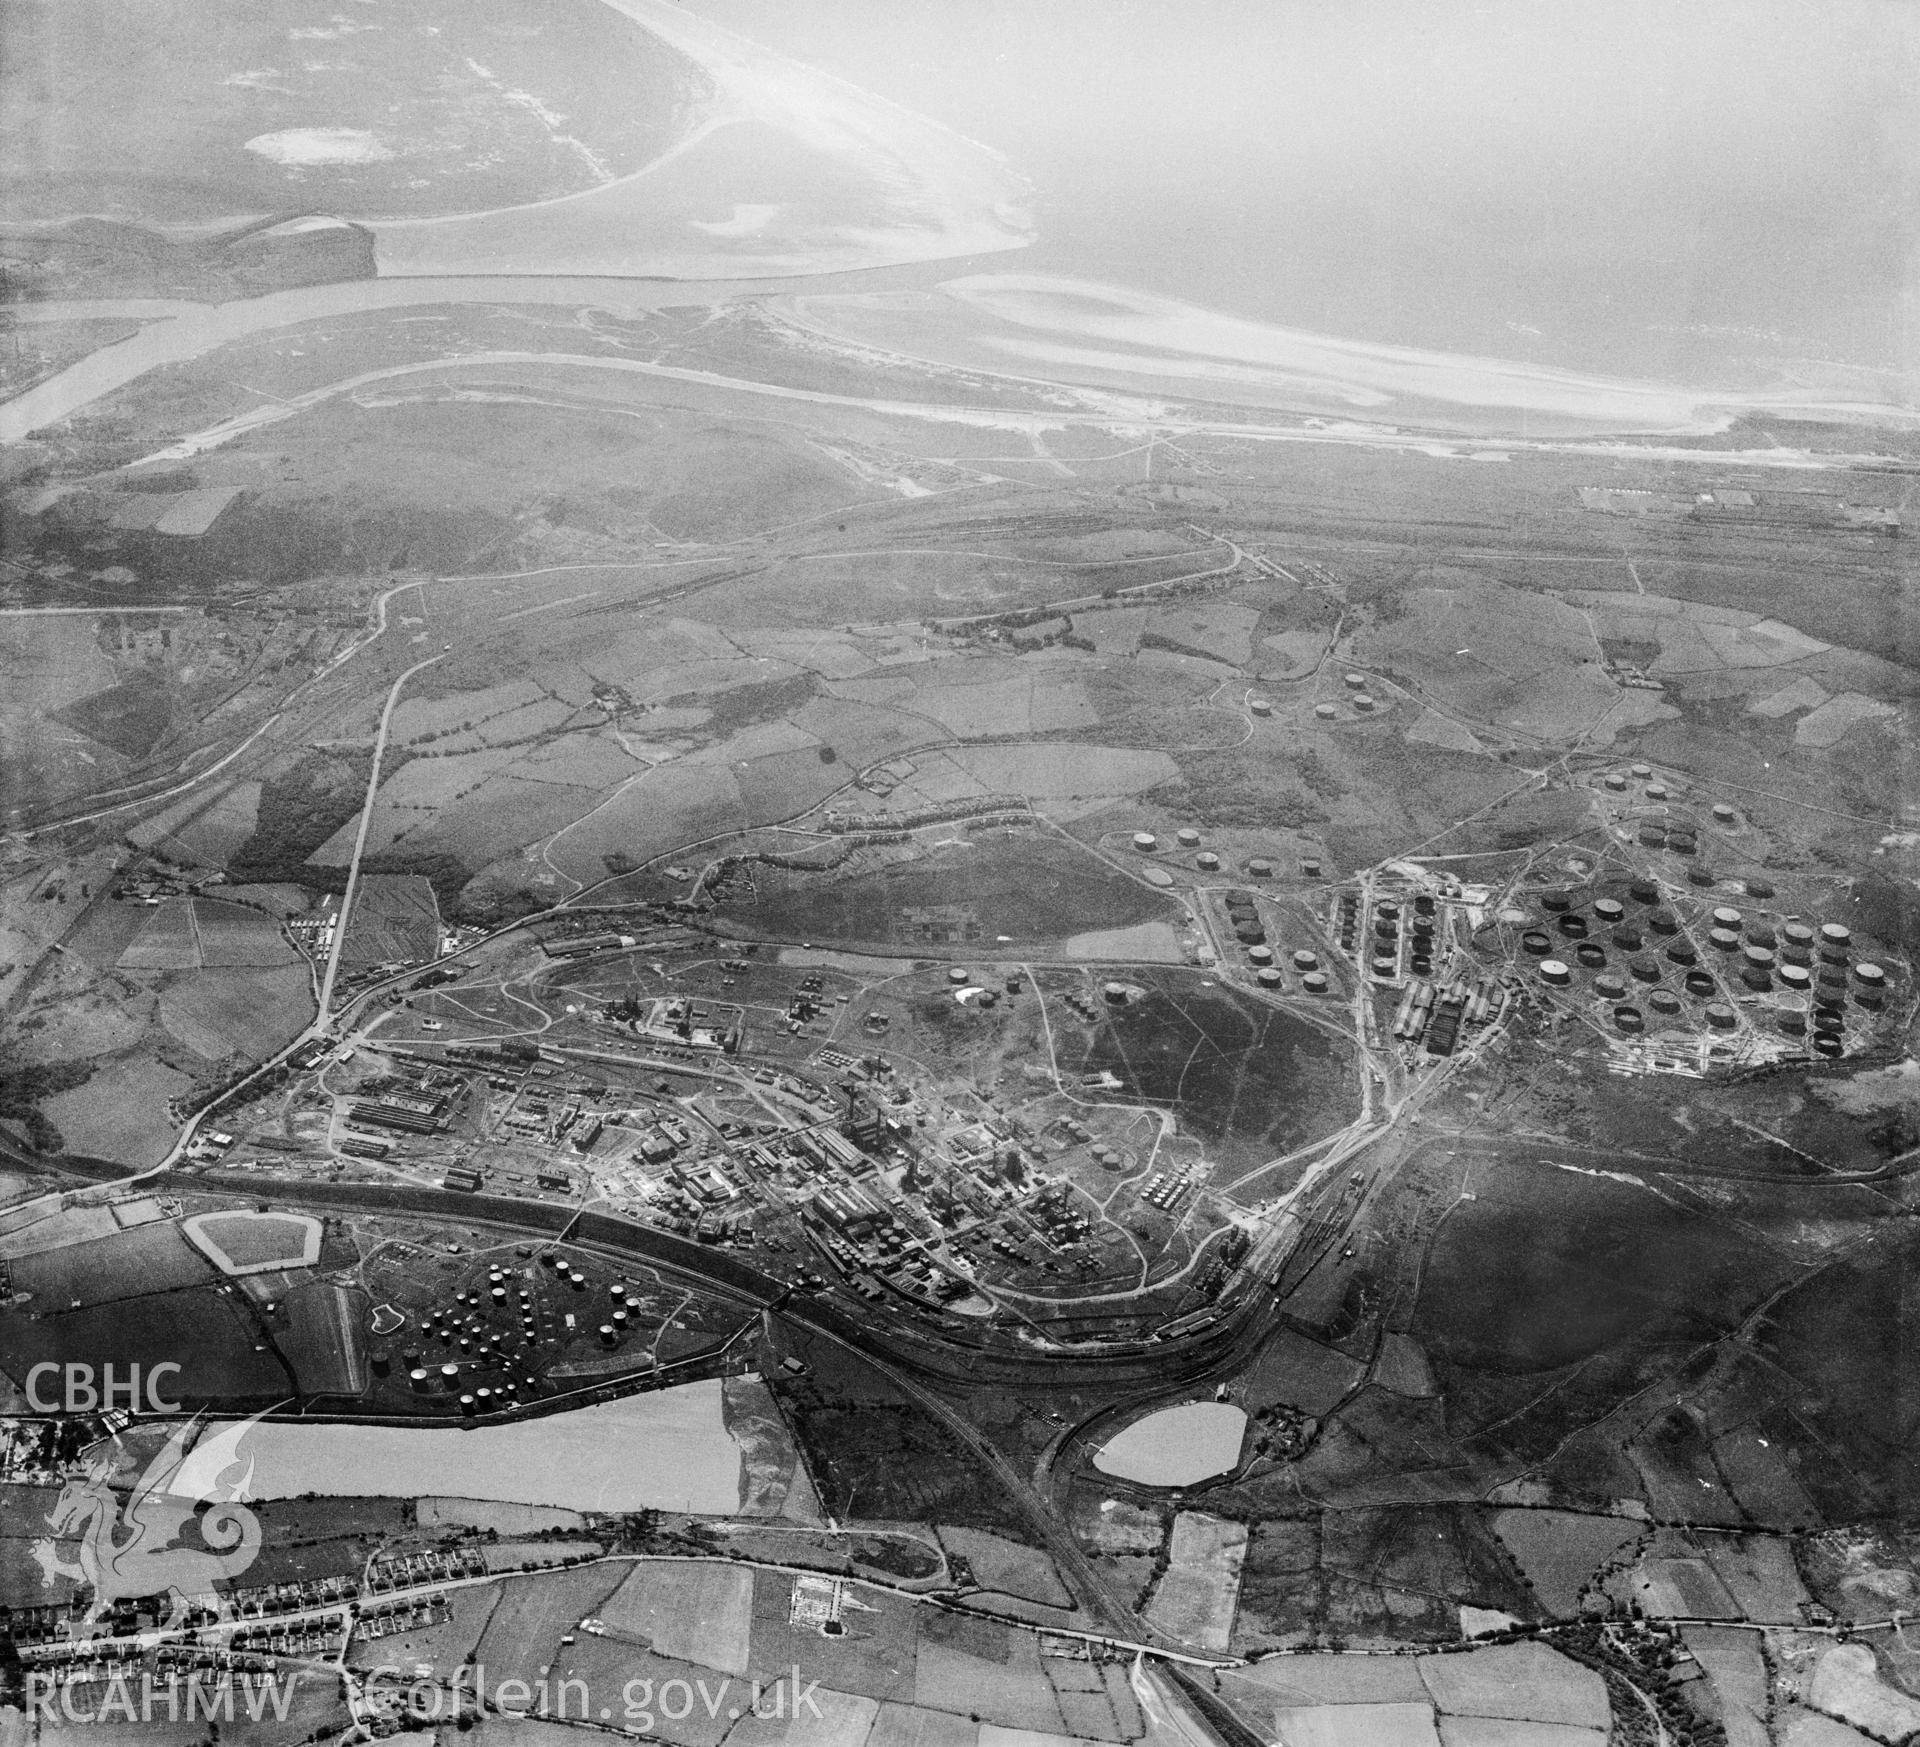 General view of the Anglo Iranian oil refinery, Llandarcy, with the river Neath and Baglan Bay in the distance. Oblique aerial photograph, 5?" cut roll film.